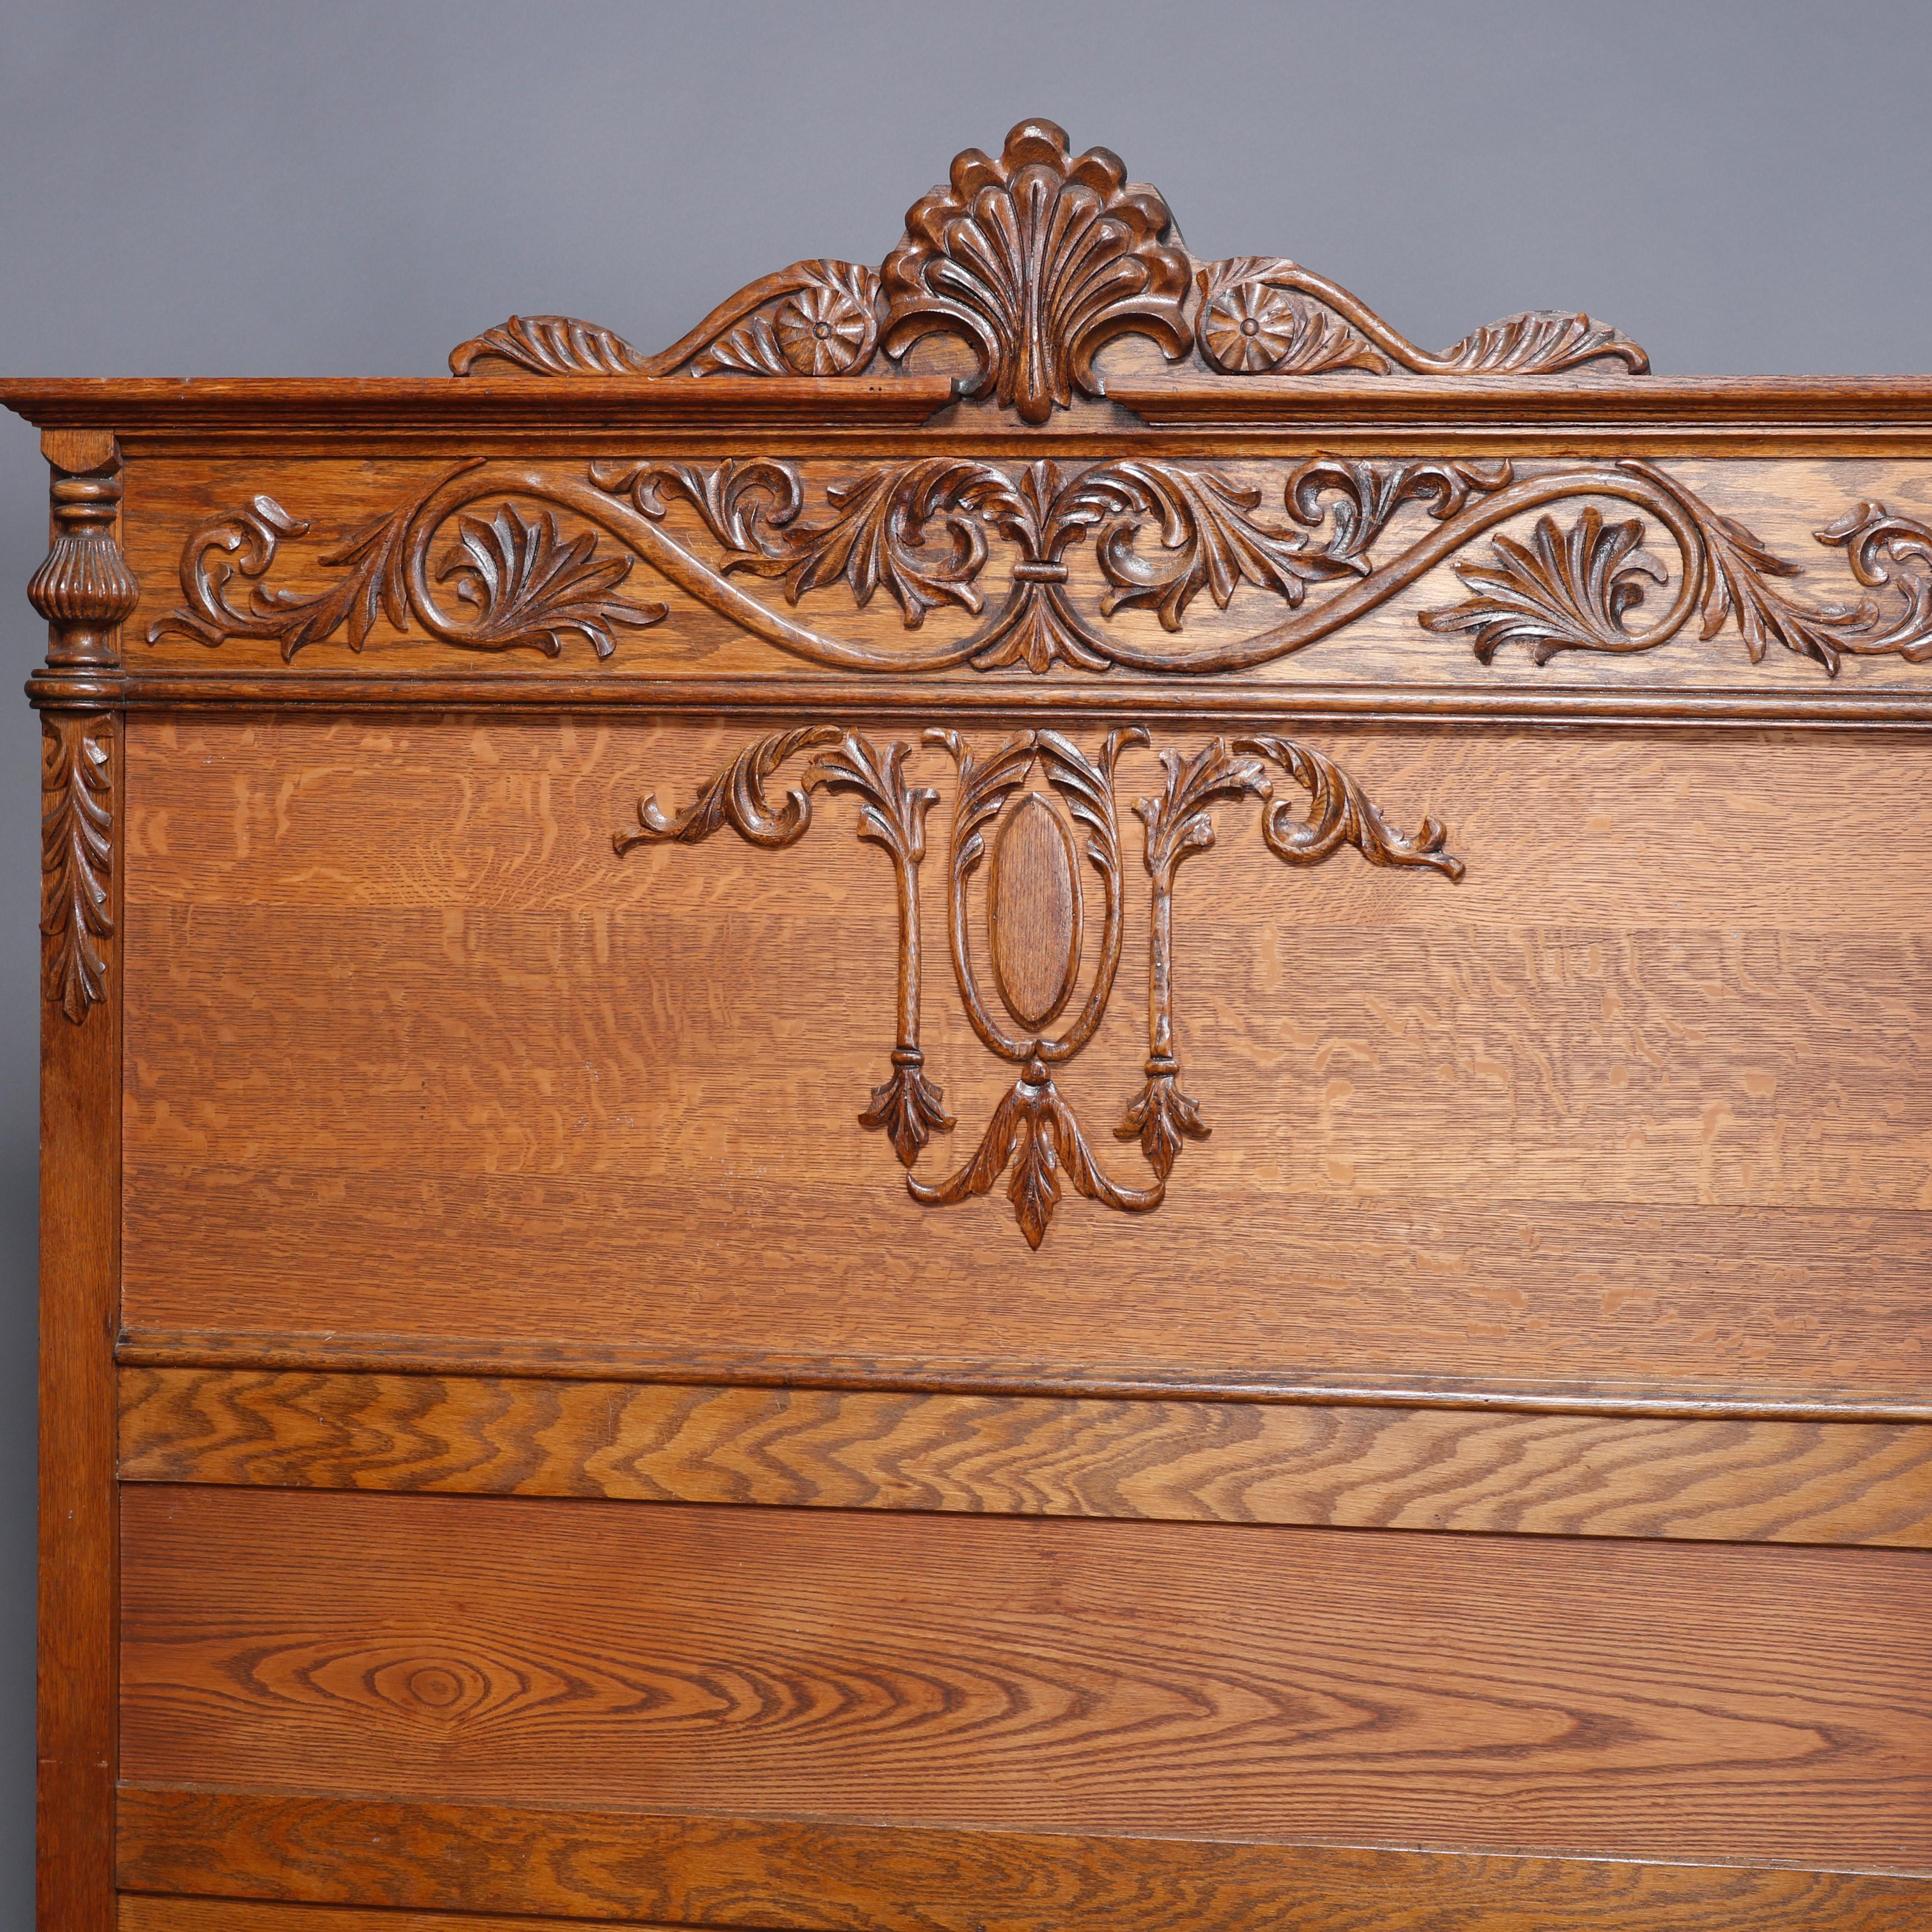 An antique R.J. Horner full or double bed frame offers oak construction with tall back having carved palmette crest with flanking scroll and foliate acanthus elements, raised on scroll form feet, circa 1910

Measures: 79.75